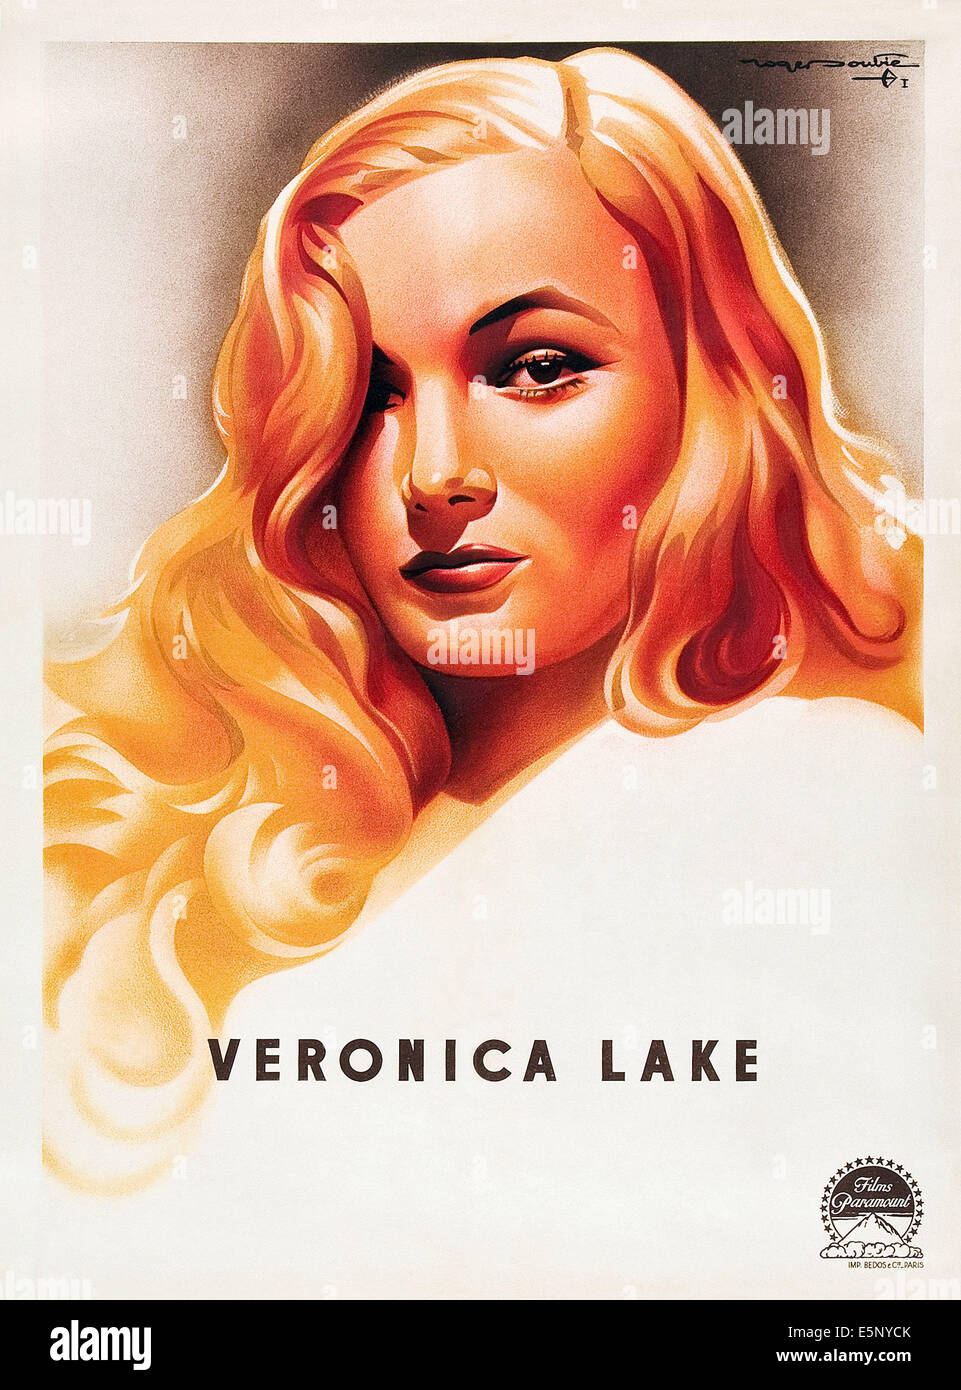 Veronica Lake on personality poster, 1944. Stock Photo